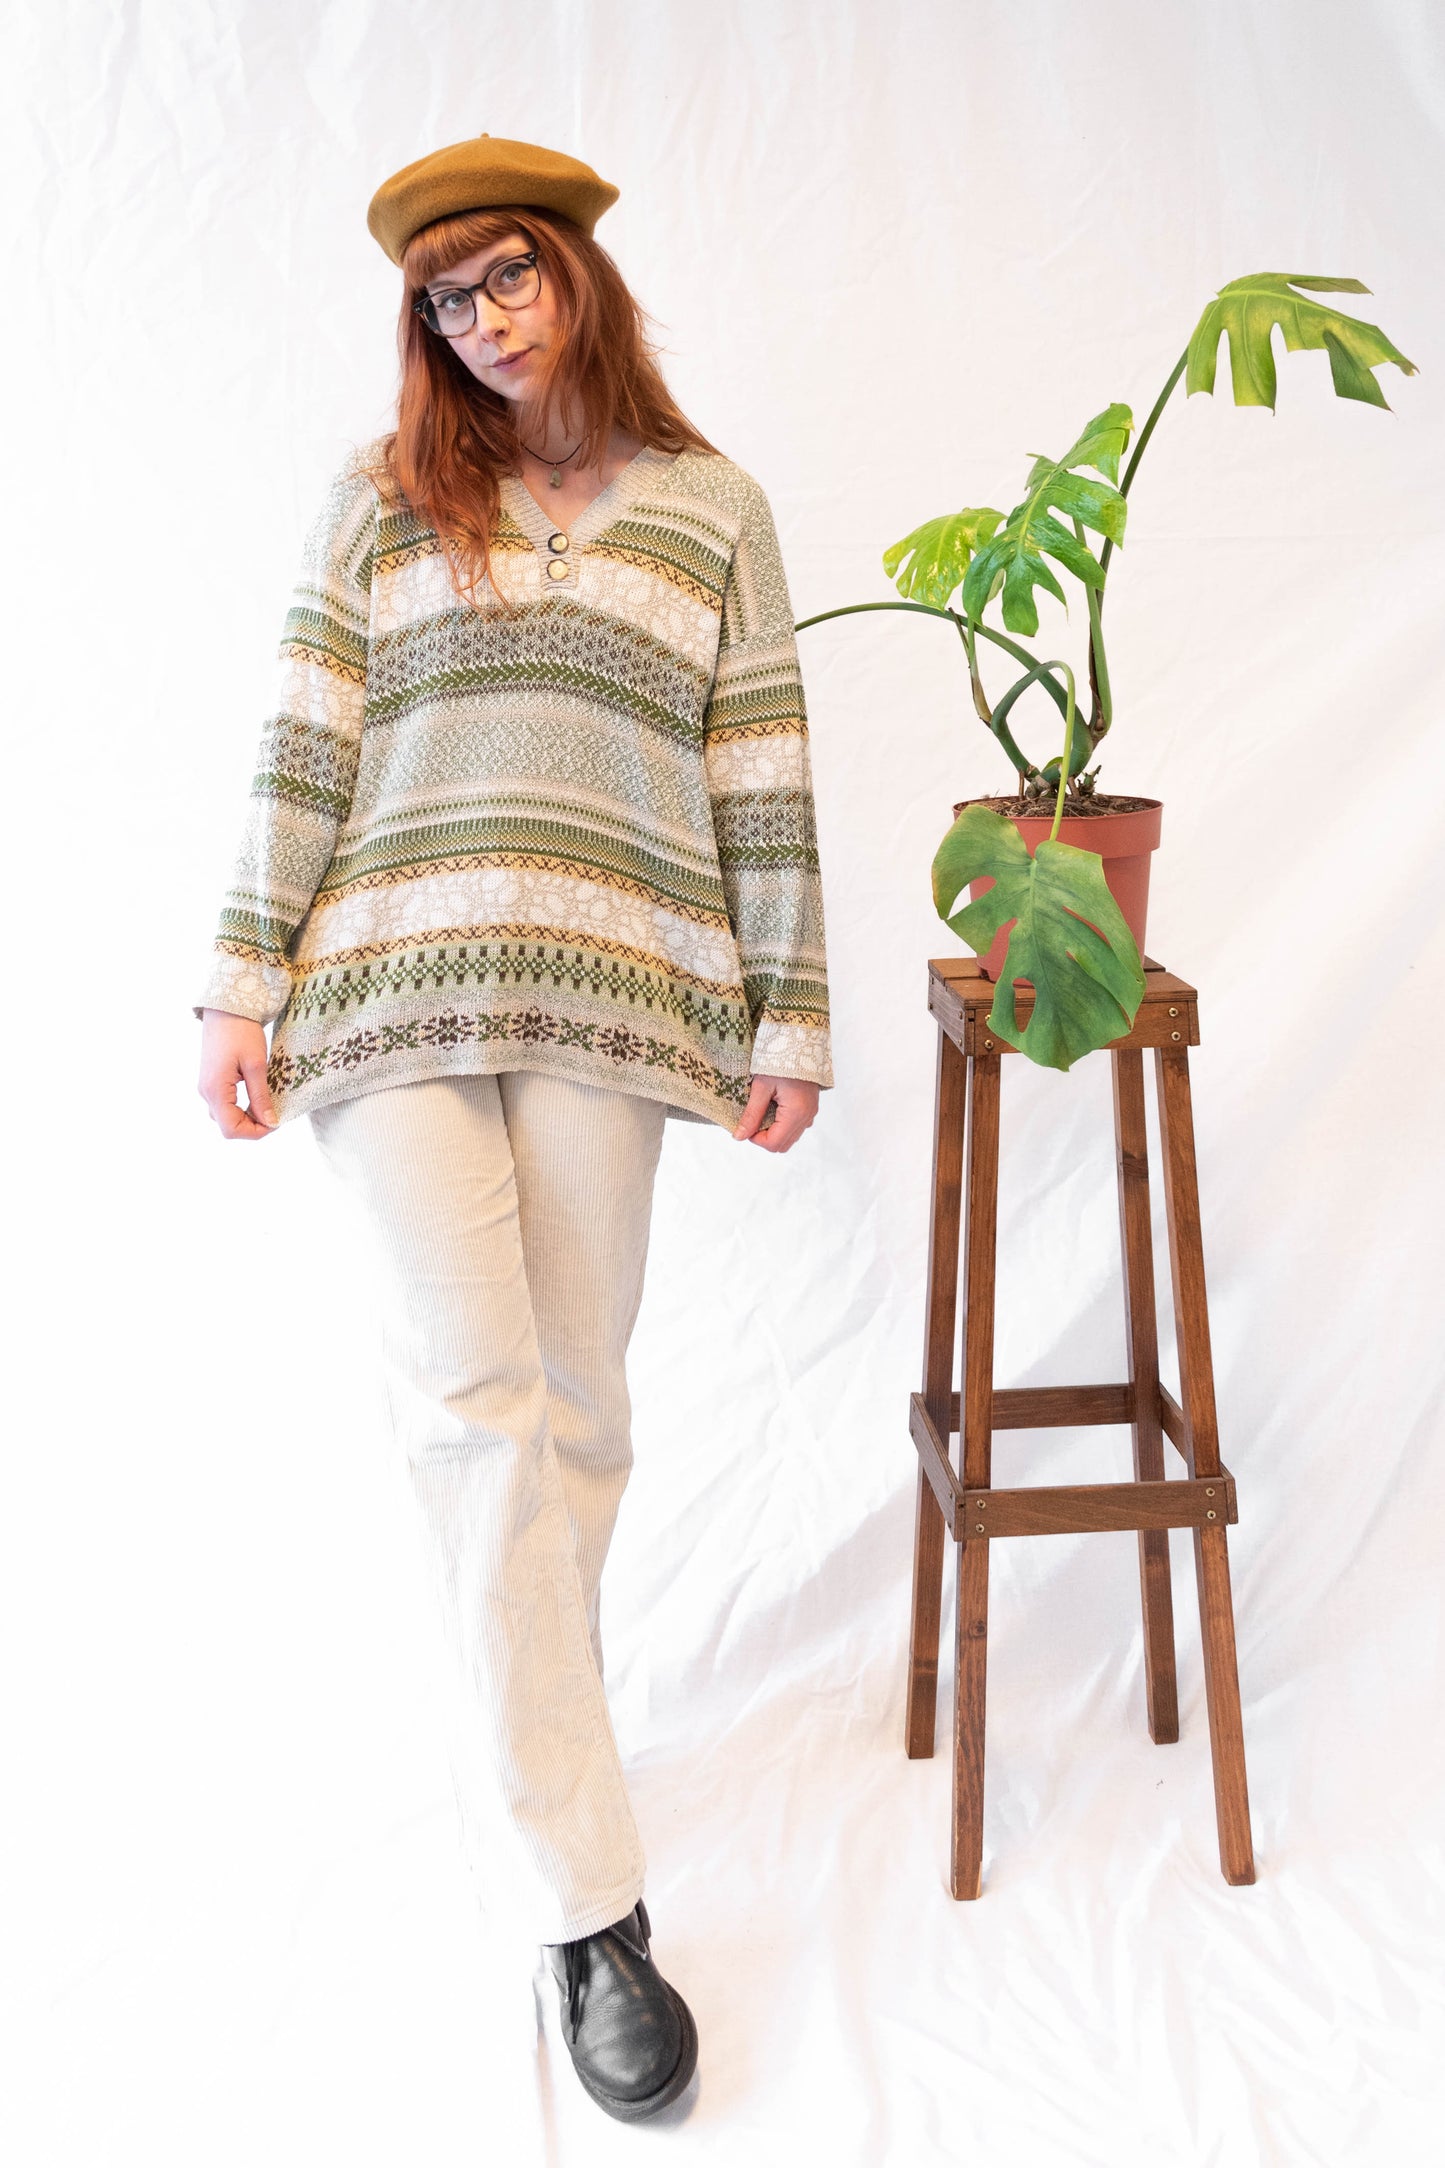 NEW IN! Vintage sweater